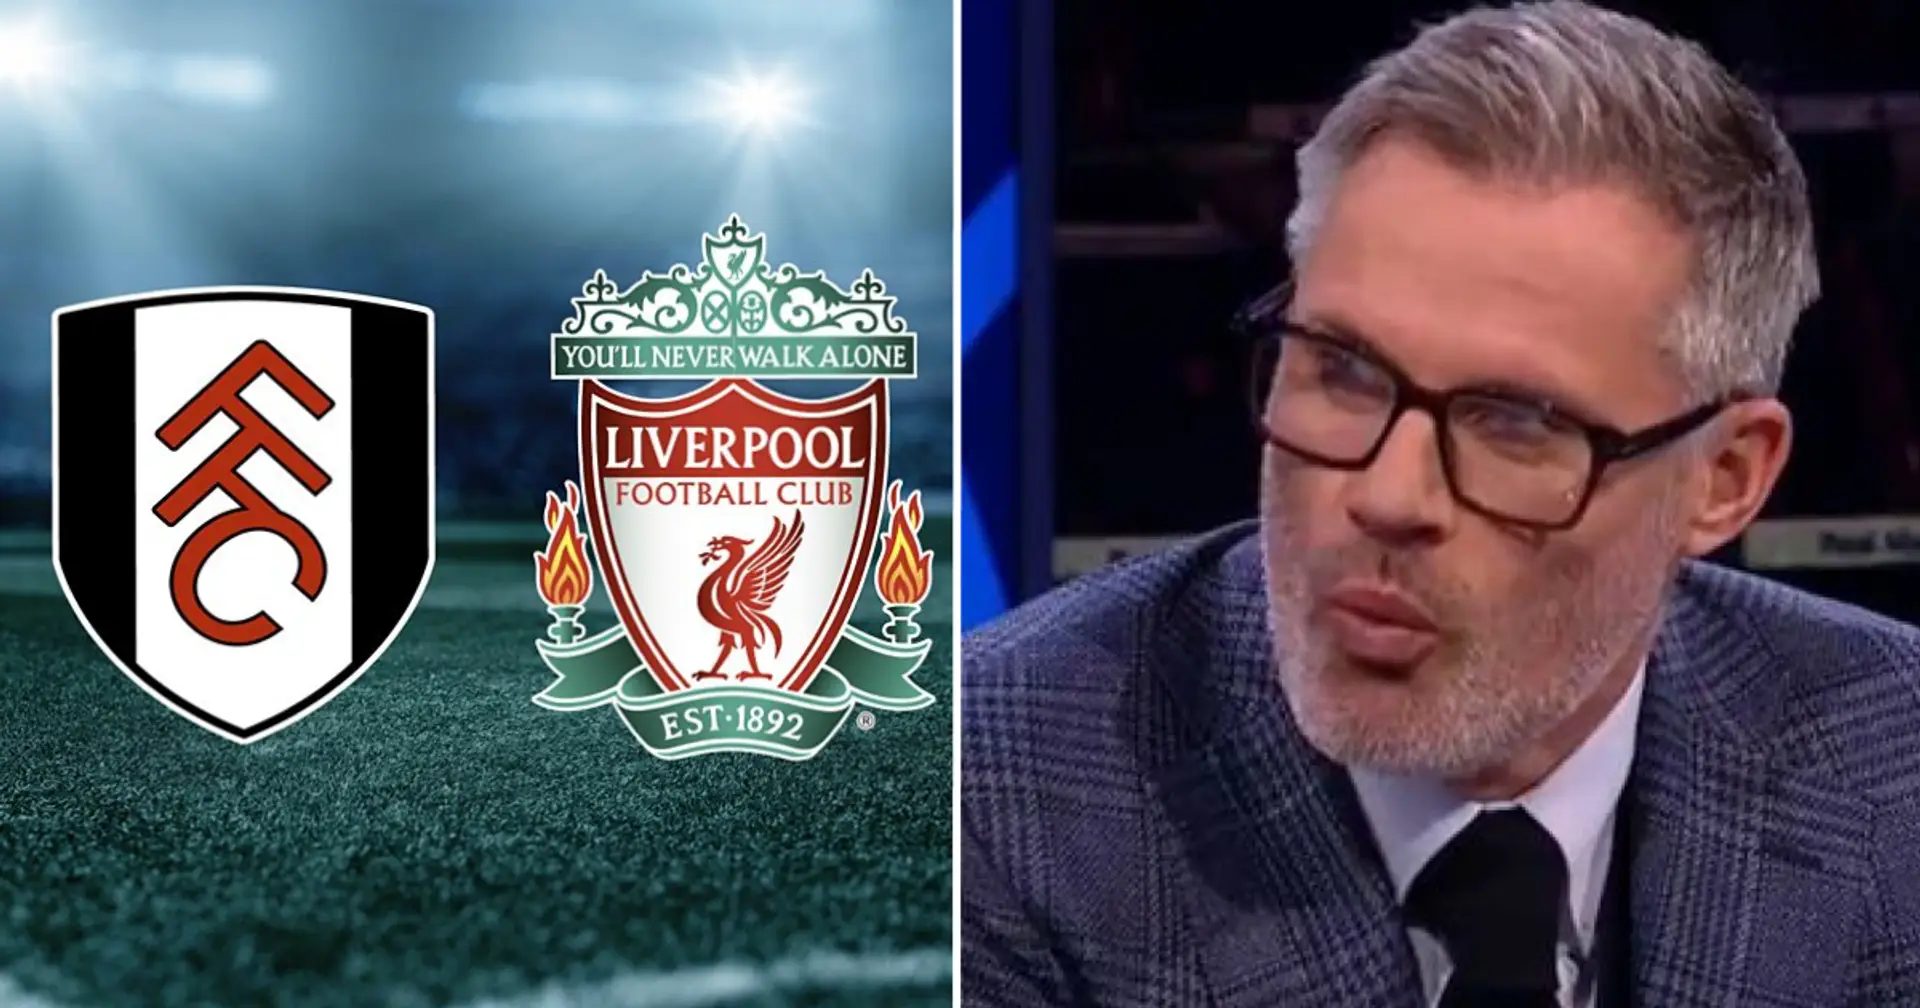 'Another tough game': Jamie Carragher predicts exact scoreline for Liverpool v Fulham clash